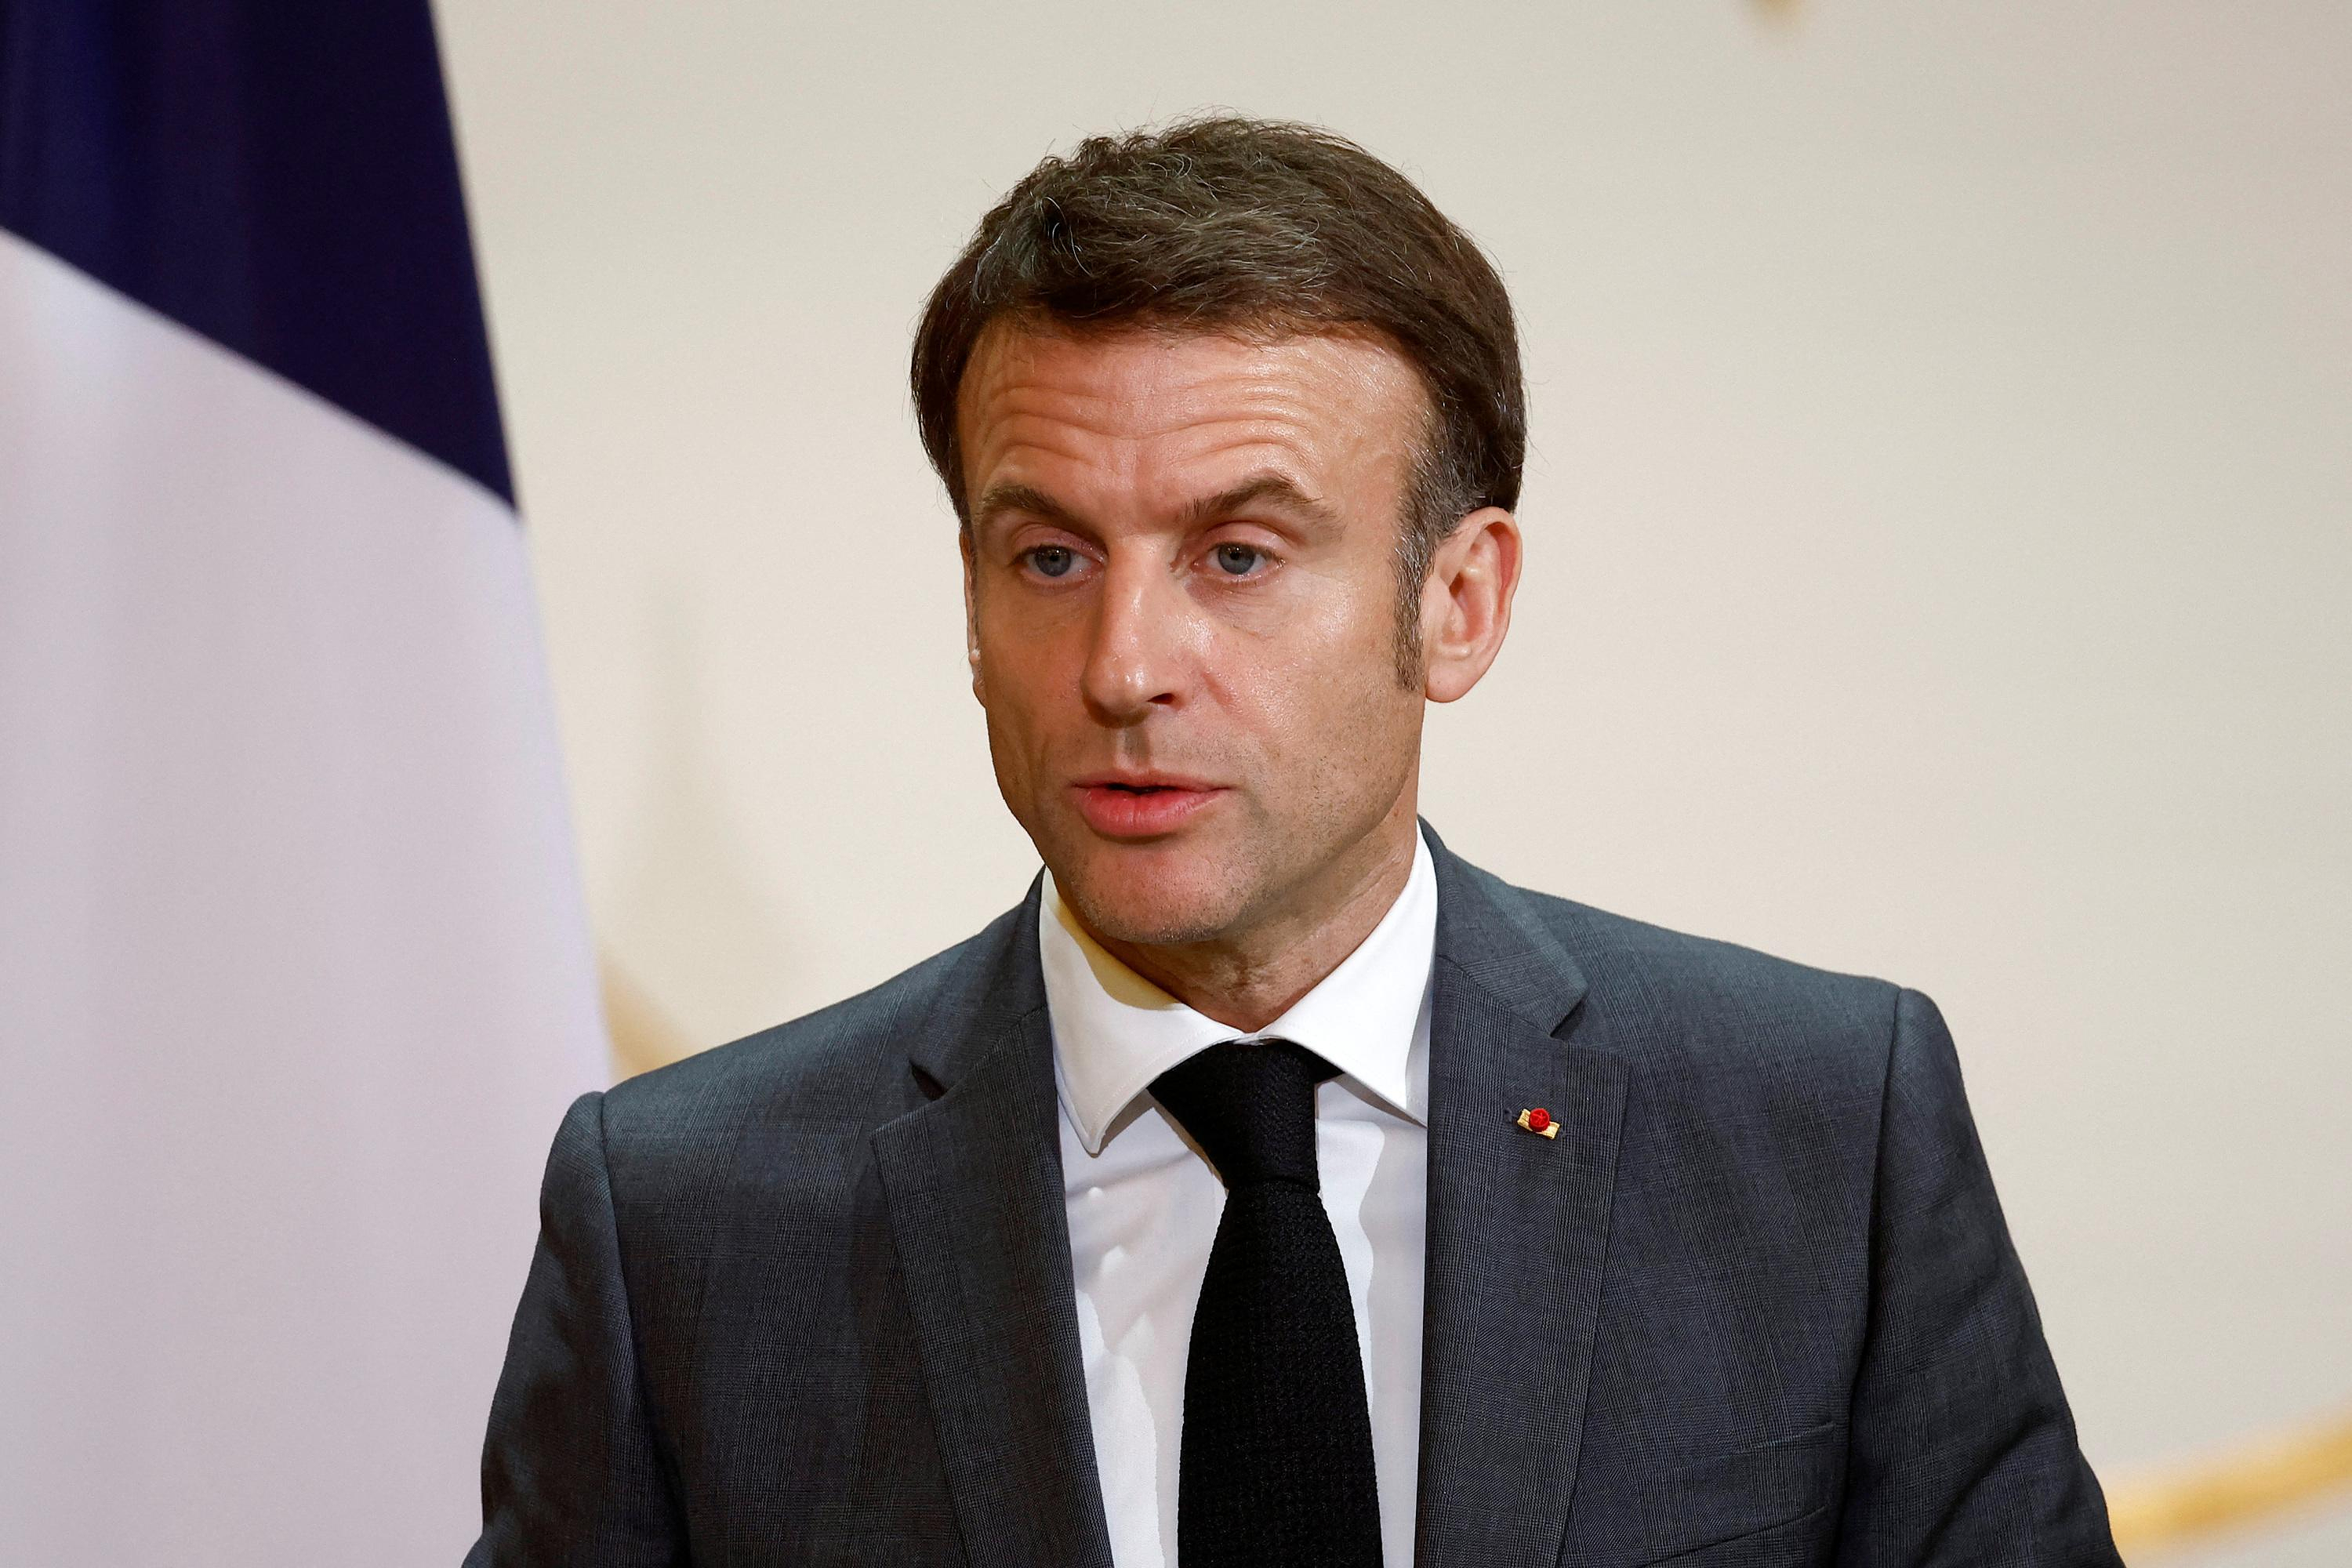 Emmanuel Macron wants to relaunch the European capital markets union project to finance businesses